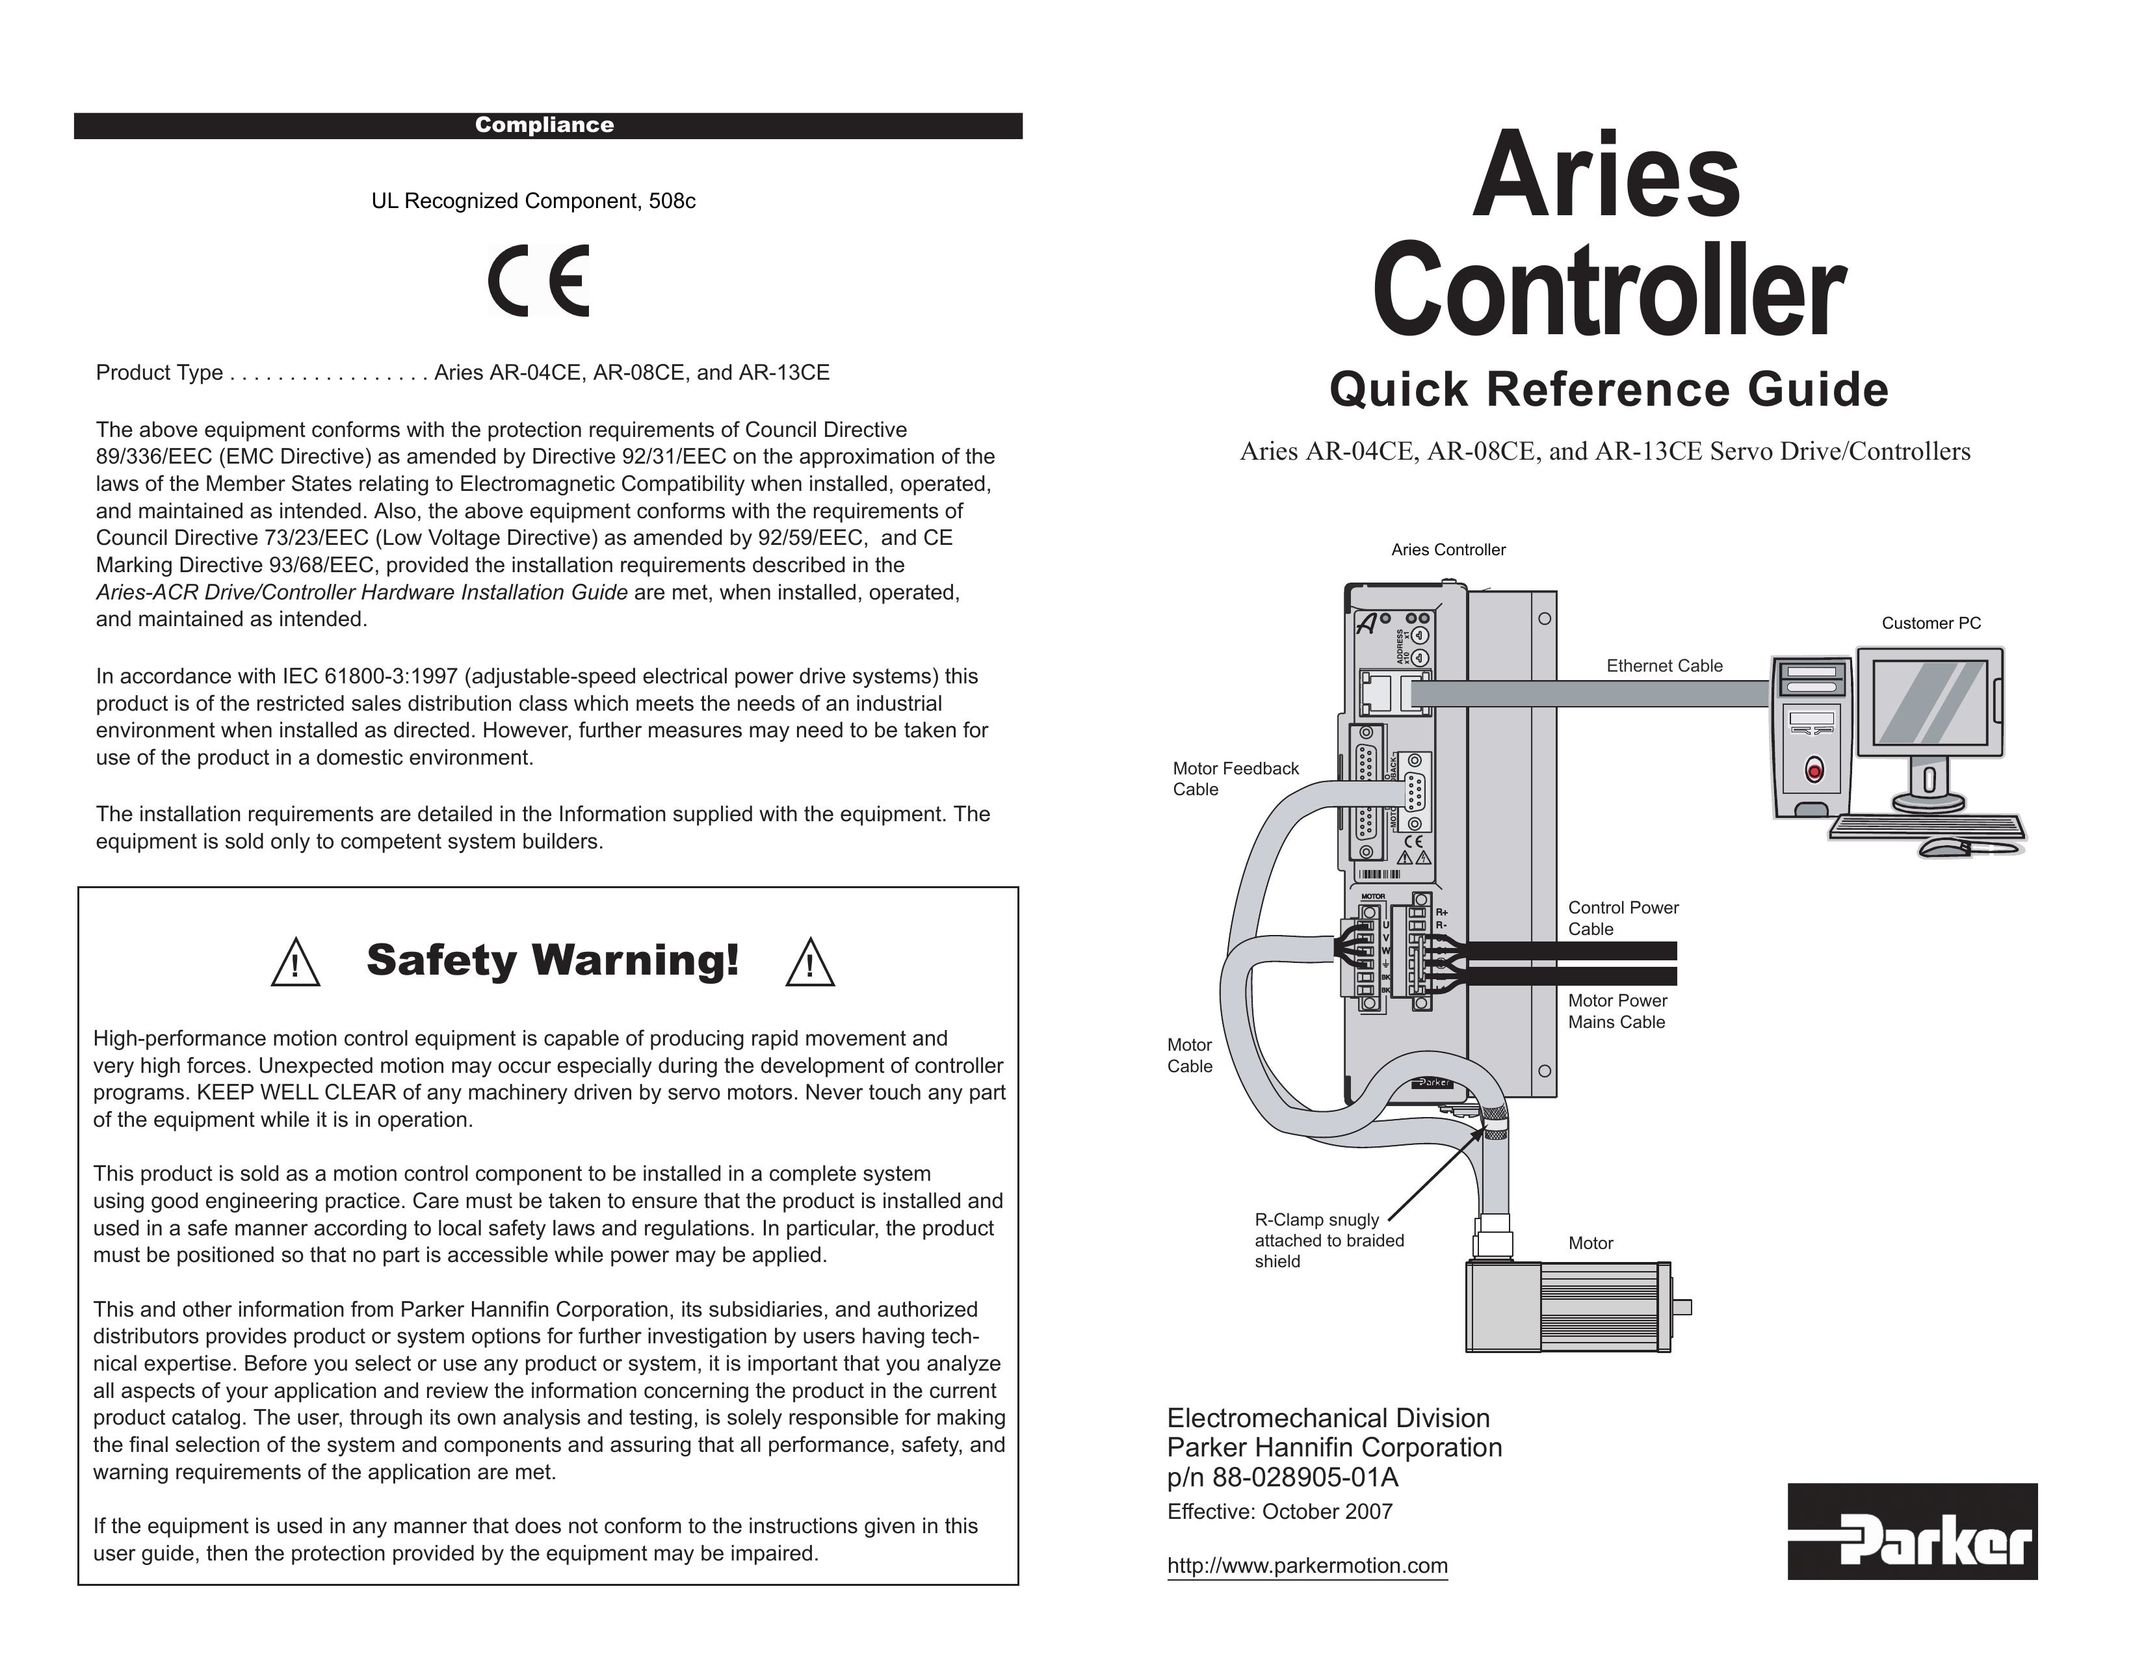 Parker Hannifin AR-04CE Home Security System User Manual